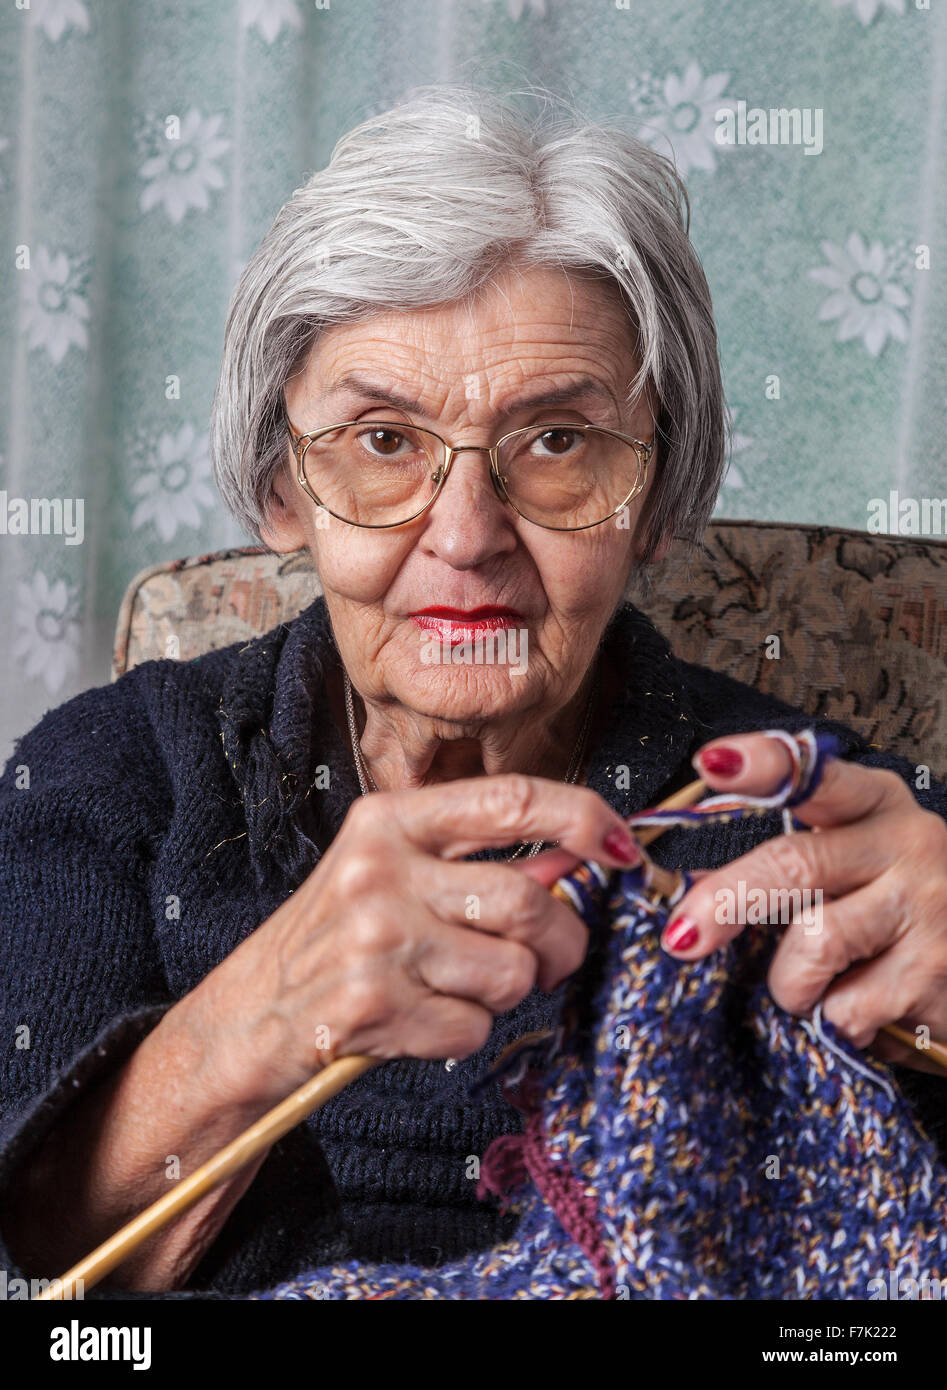 Portrait of an old wrinkled woman knitting in her home. Stock Photo